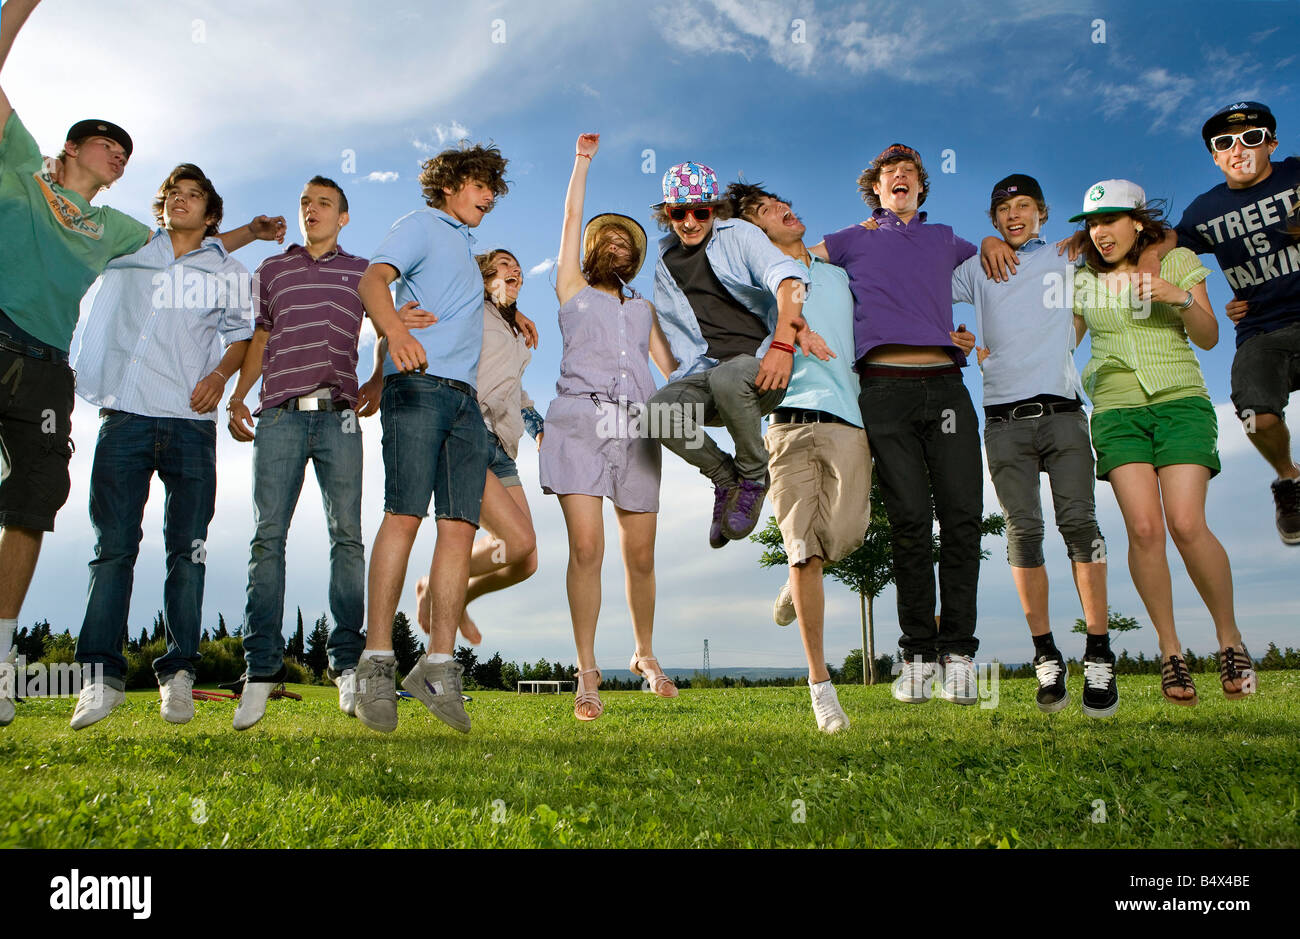 Teen Group Jumping In Park Stock Photo Alamy